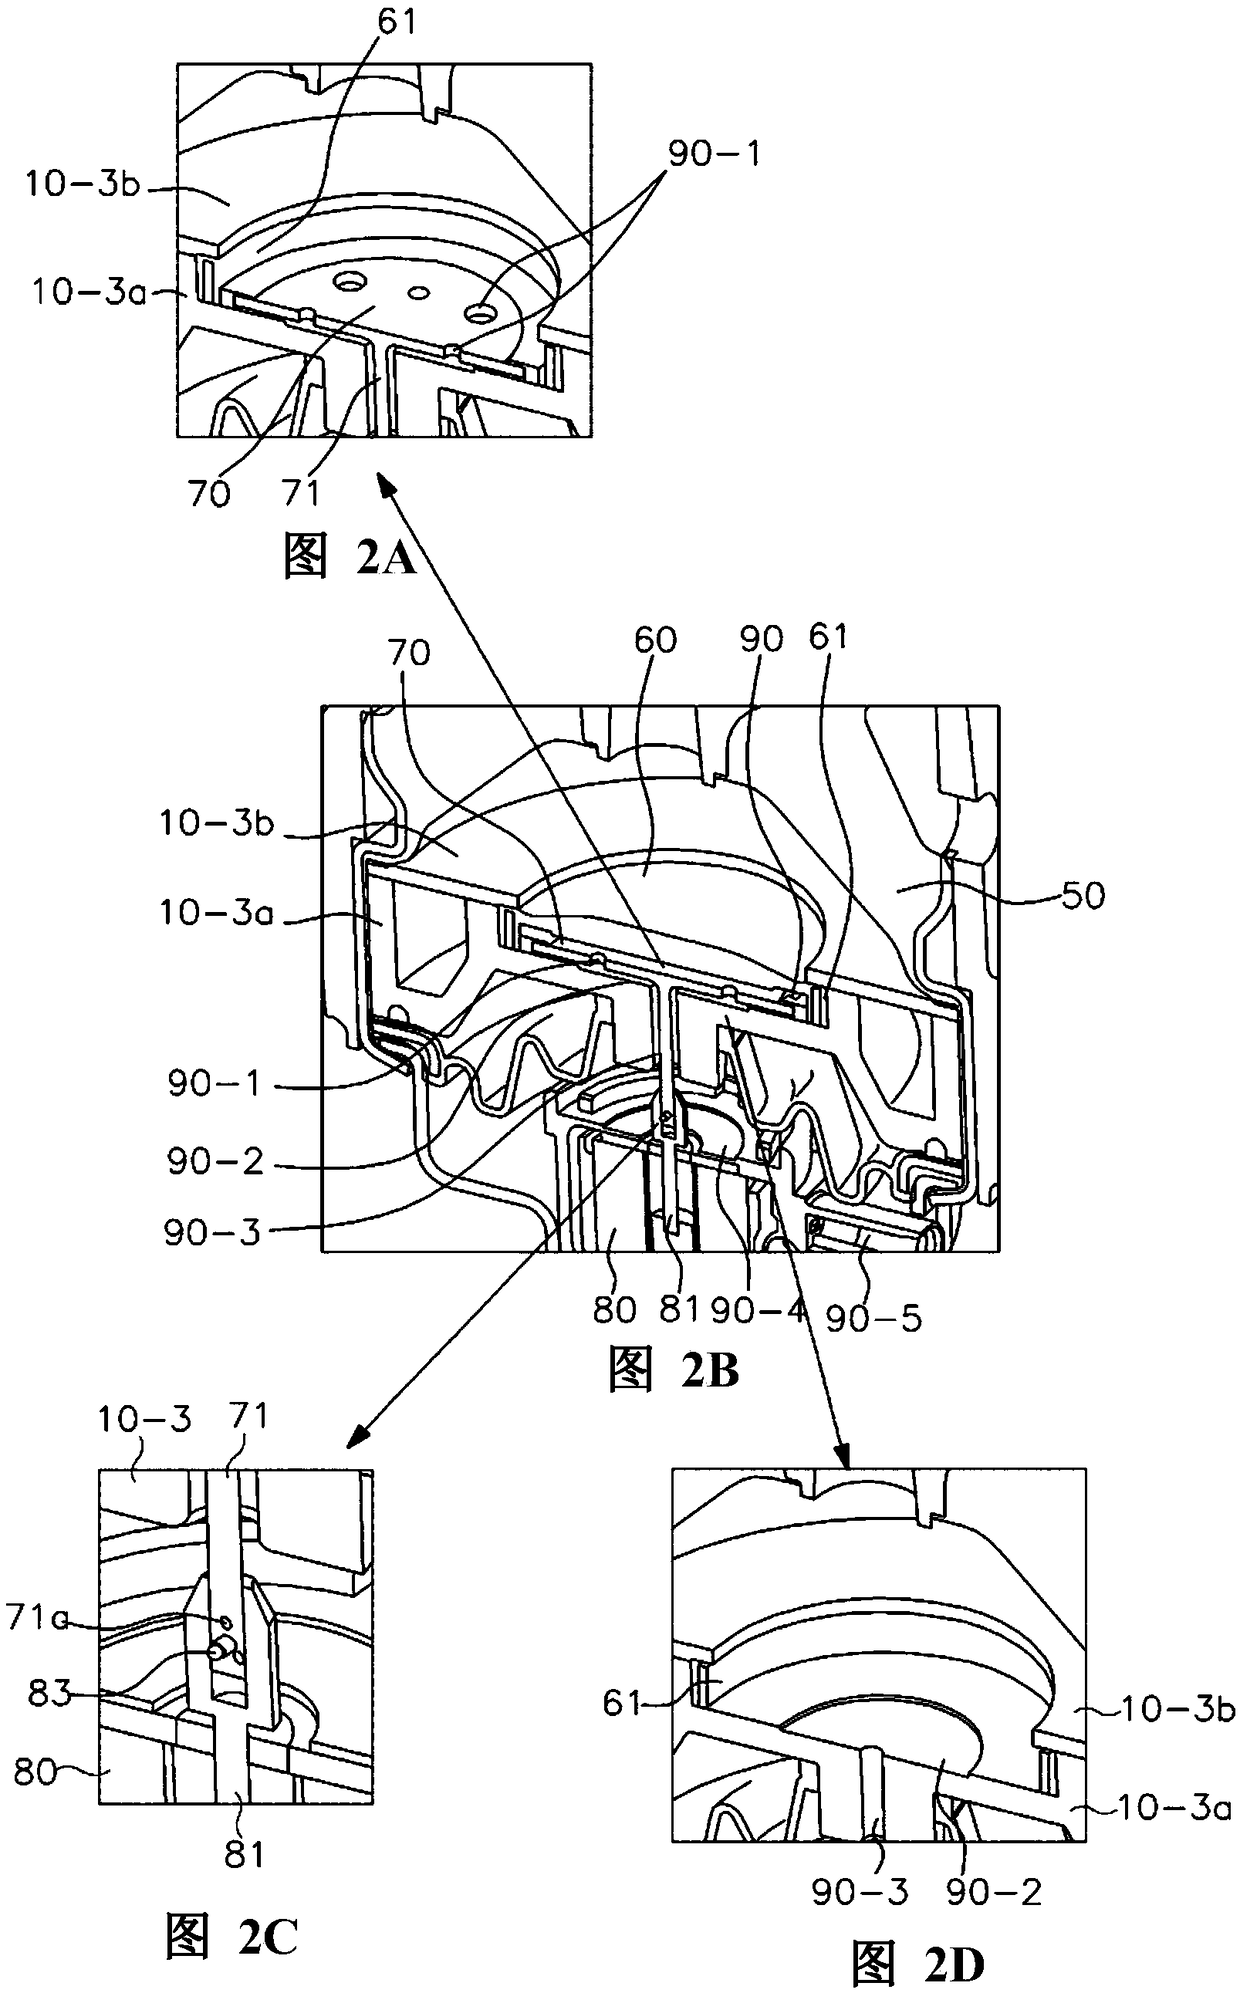 Electronic semi-active control engine suspension with variable air chamber